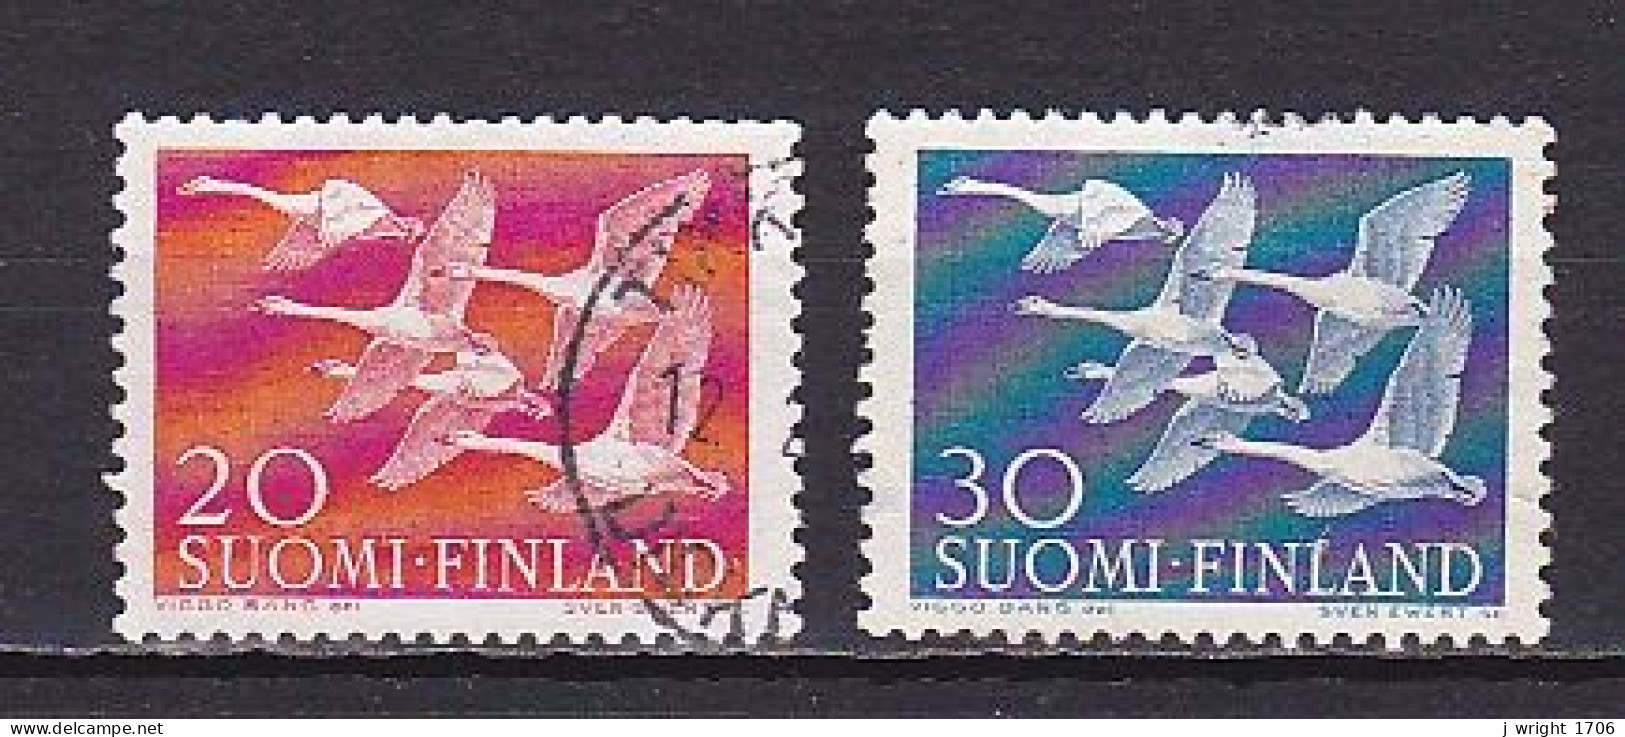 Finland, 1956, Nordic Issue, Set, USED - Oblitérés